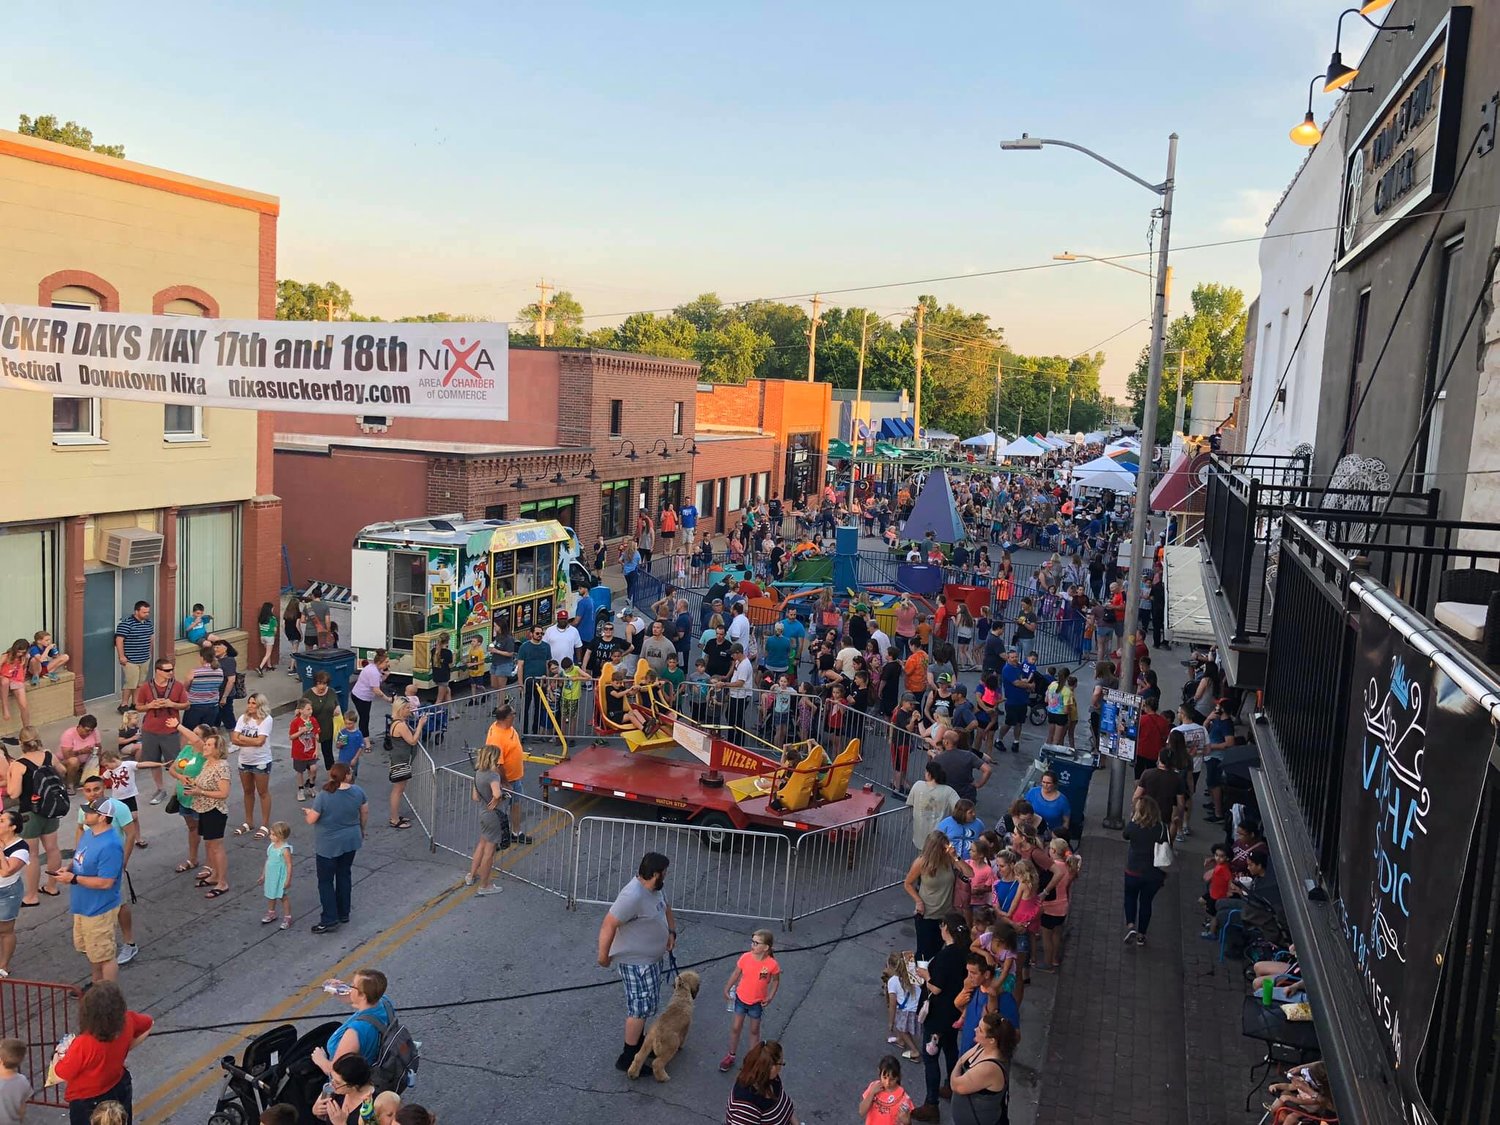 Sucker Days is the Nixa chamber's largest annual event.